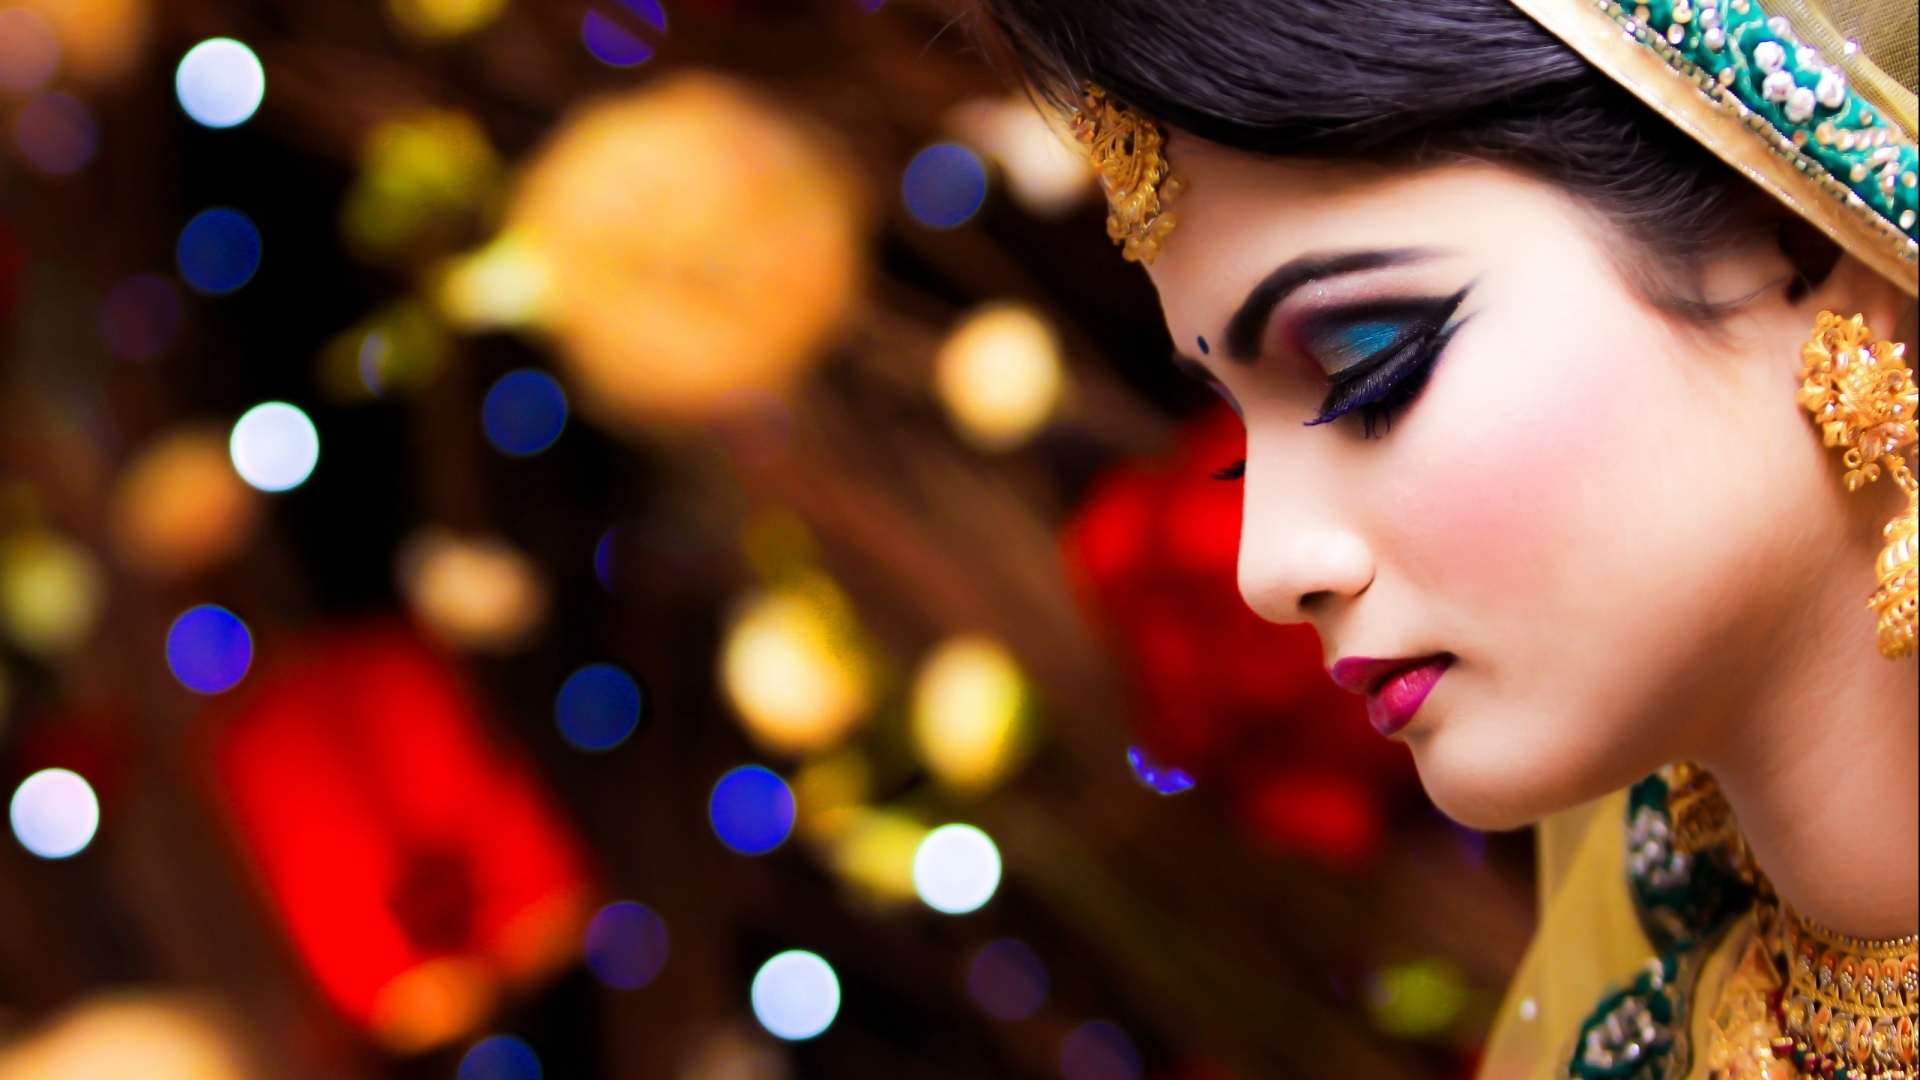 High Resolution Beauty Parlour Image Wallpaper free to contribute any